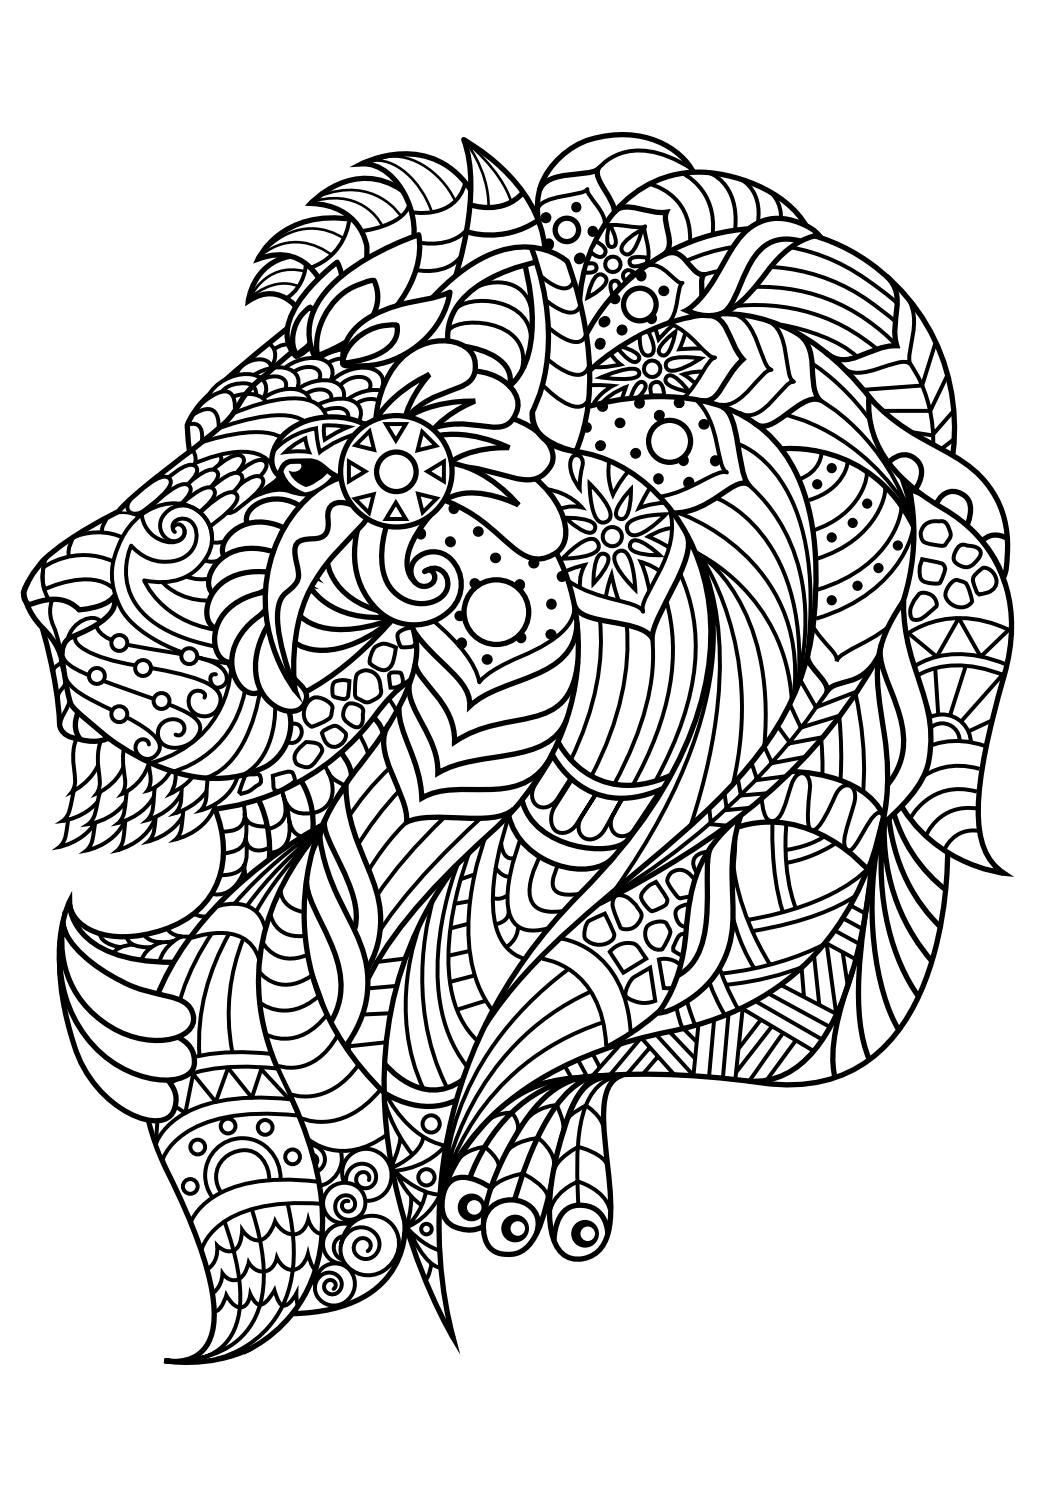 Coloring Pages For Adults Animals
 Animal coloring pages pdf